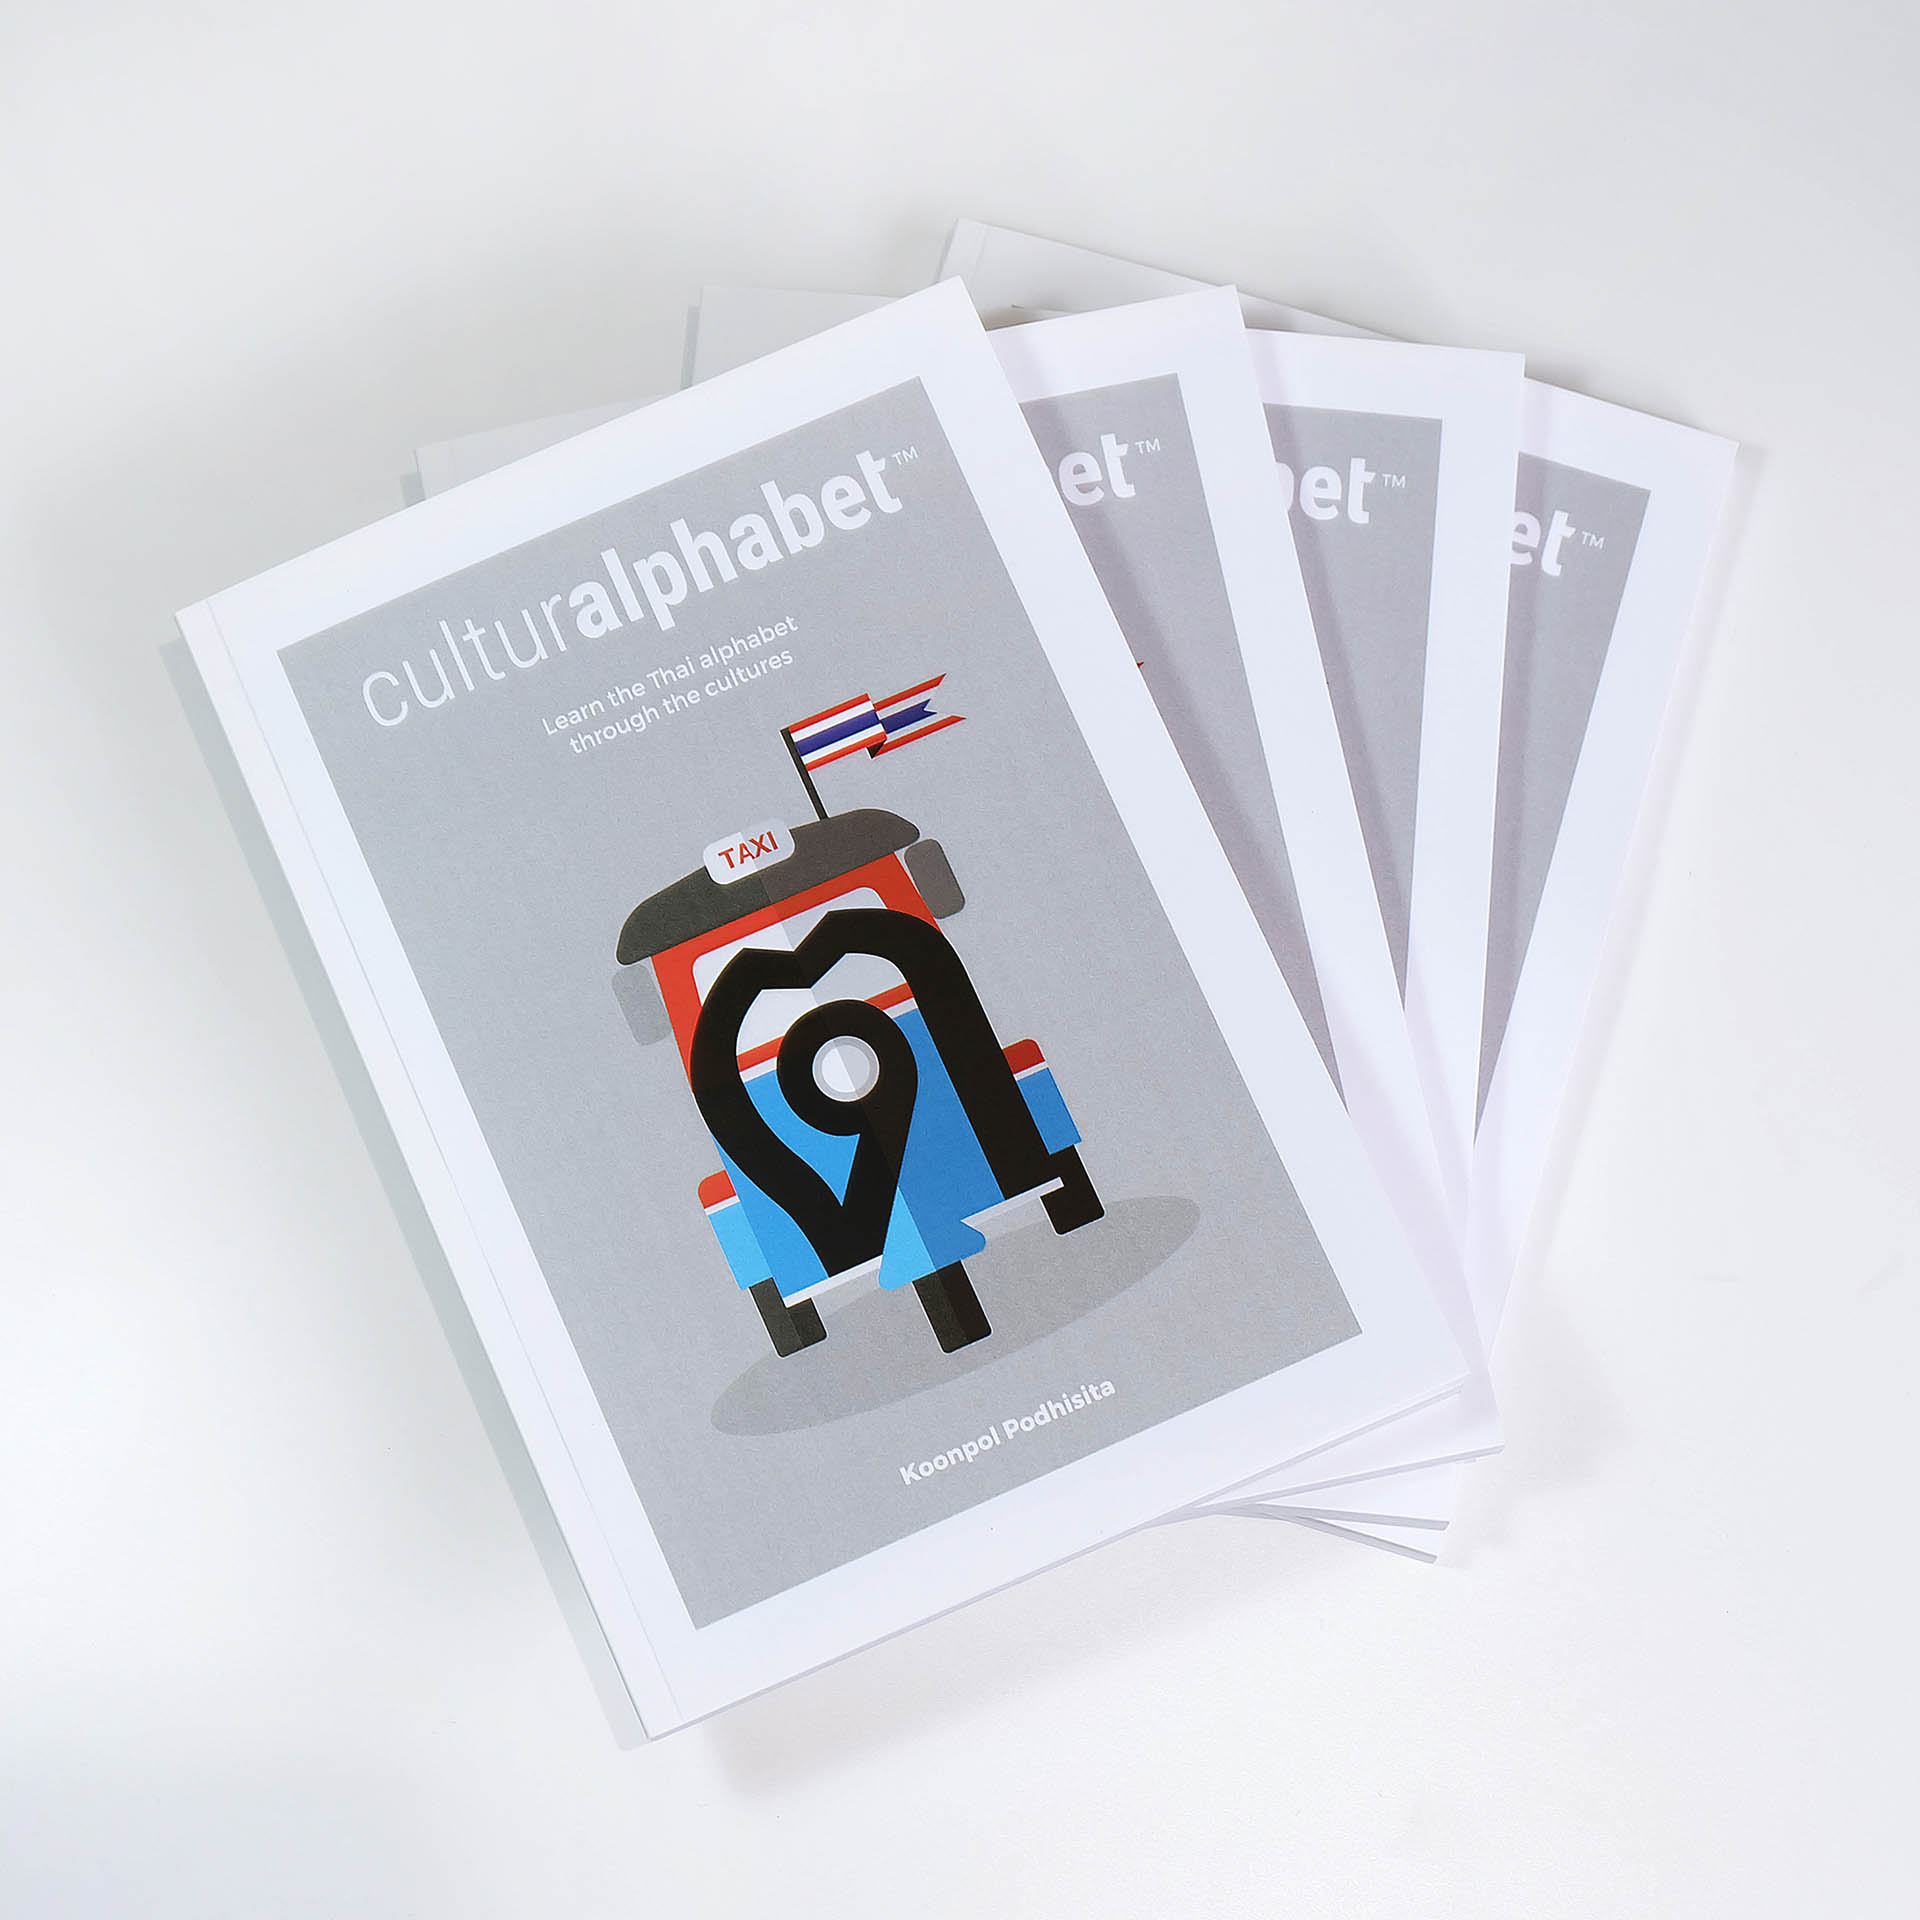 Book cover design for Culturalphabet, a visual communication aid to help understand the Thai alphabet by using illustrations of Thai culture